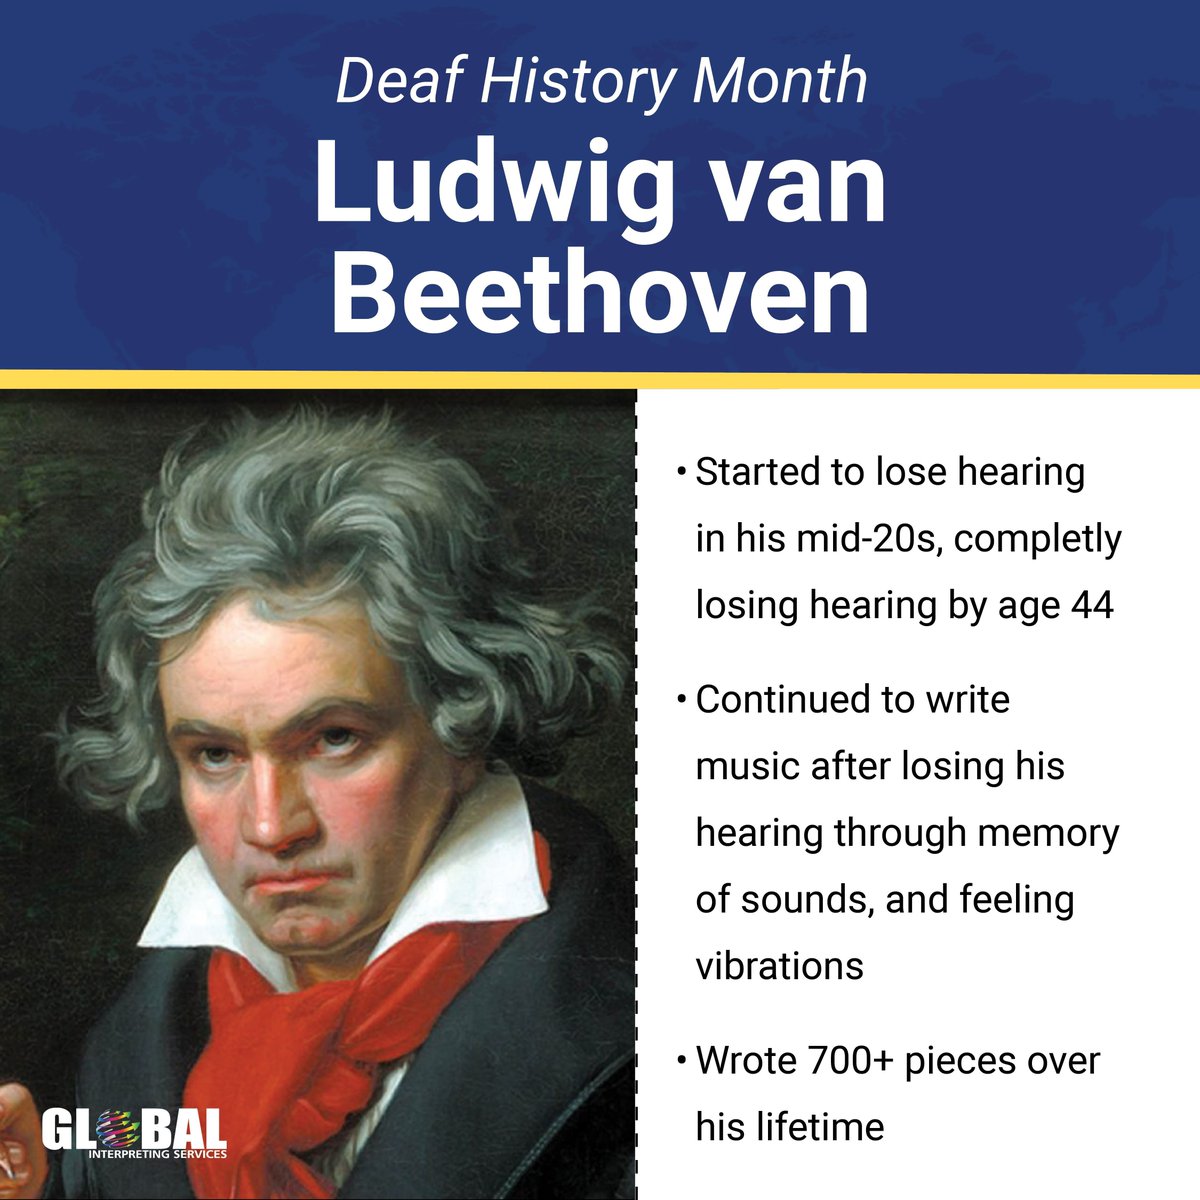 Did you know that one of the most legendary composers of all time, Ludwig van Beethoven,  became deaf while composing music?

#DeafHistoryMonth #LudwigVanBeethoven #Inspiration